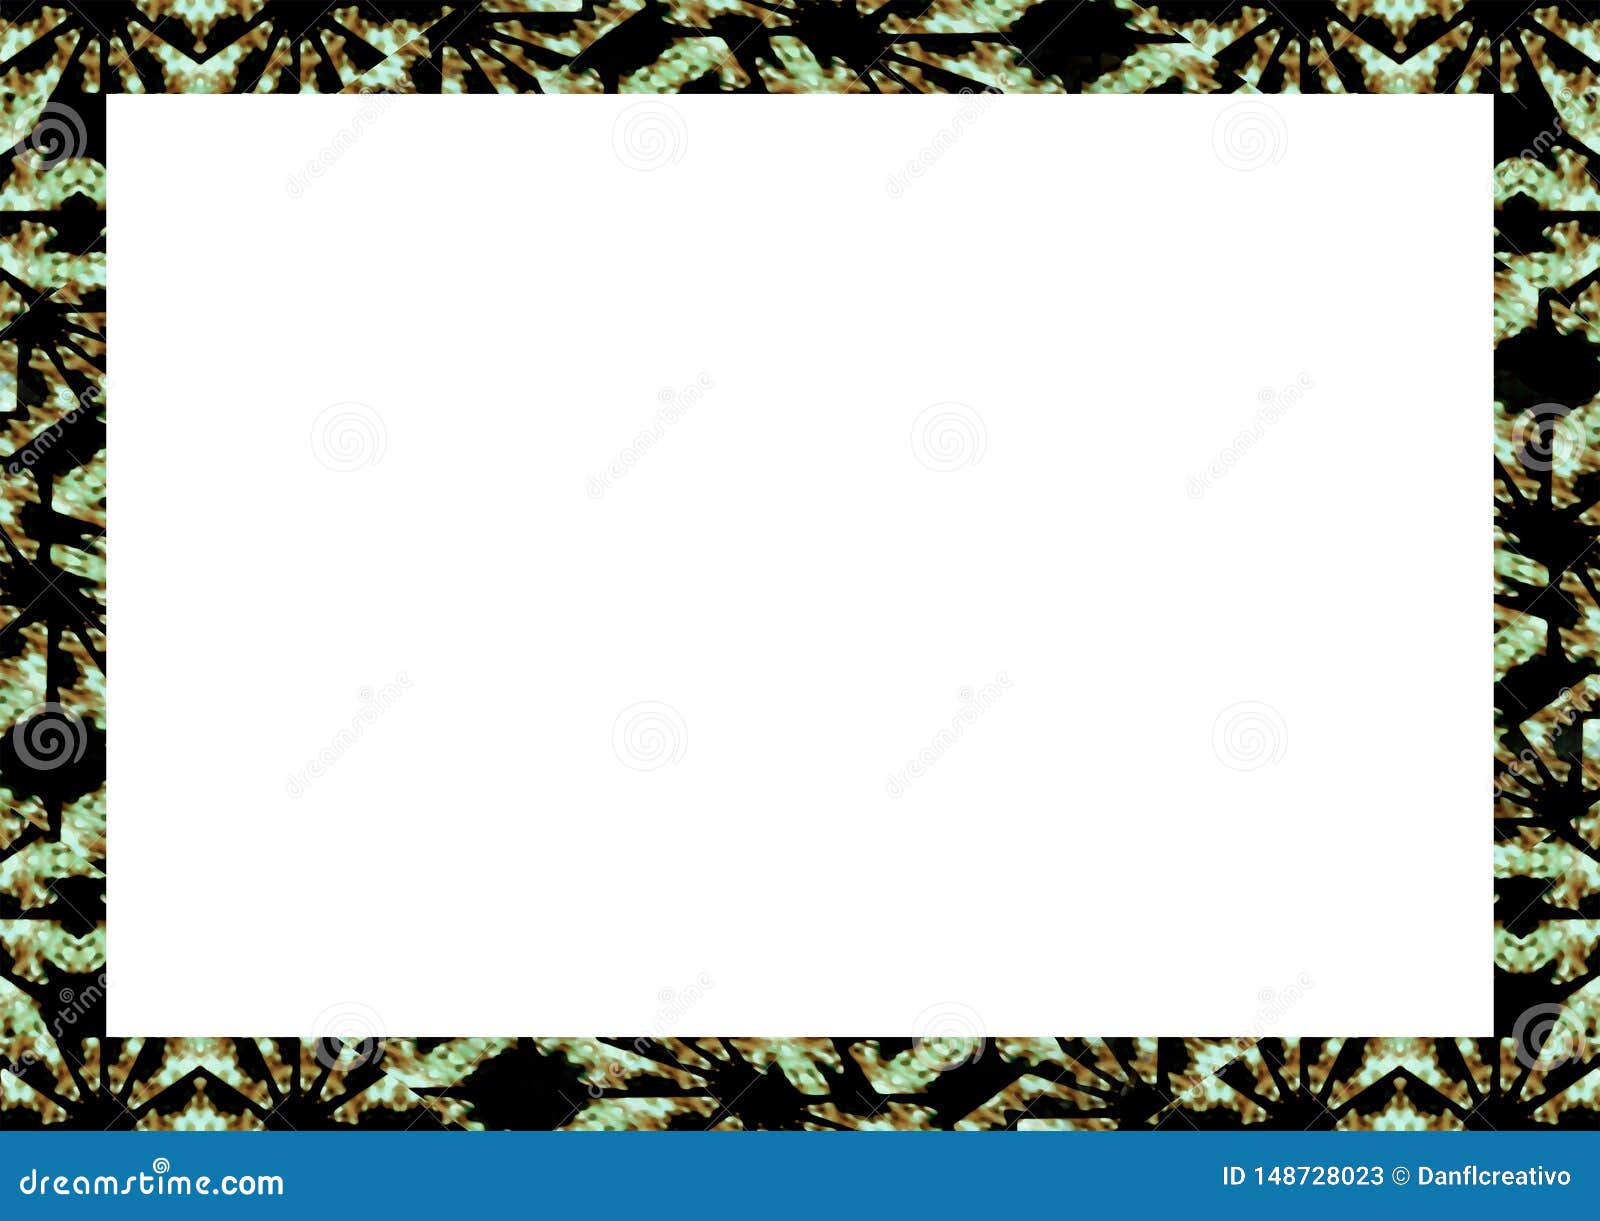 blank-landscape-frame-with-decorated-borders-stock-image-image-of